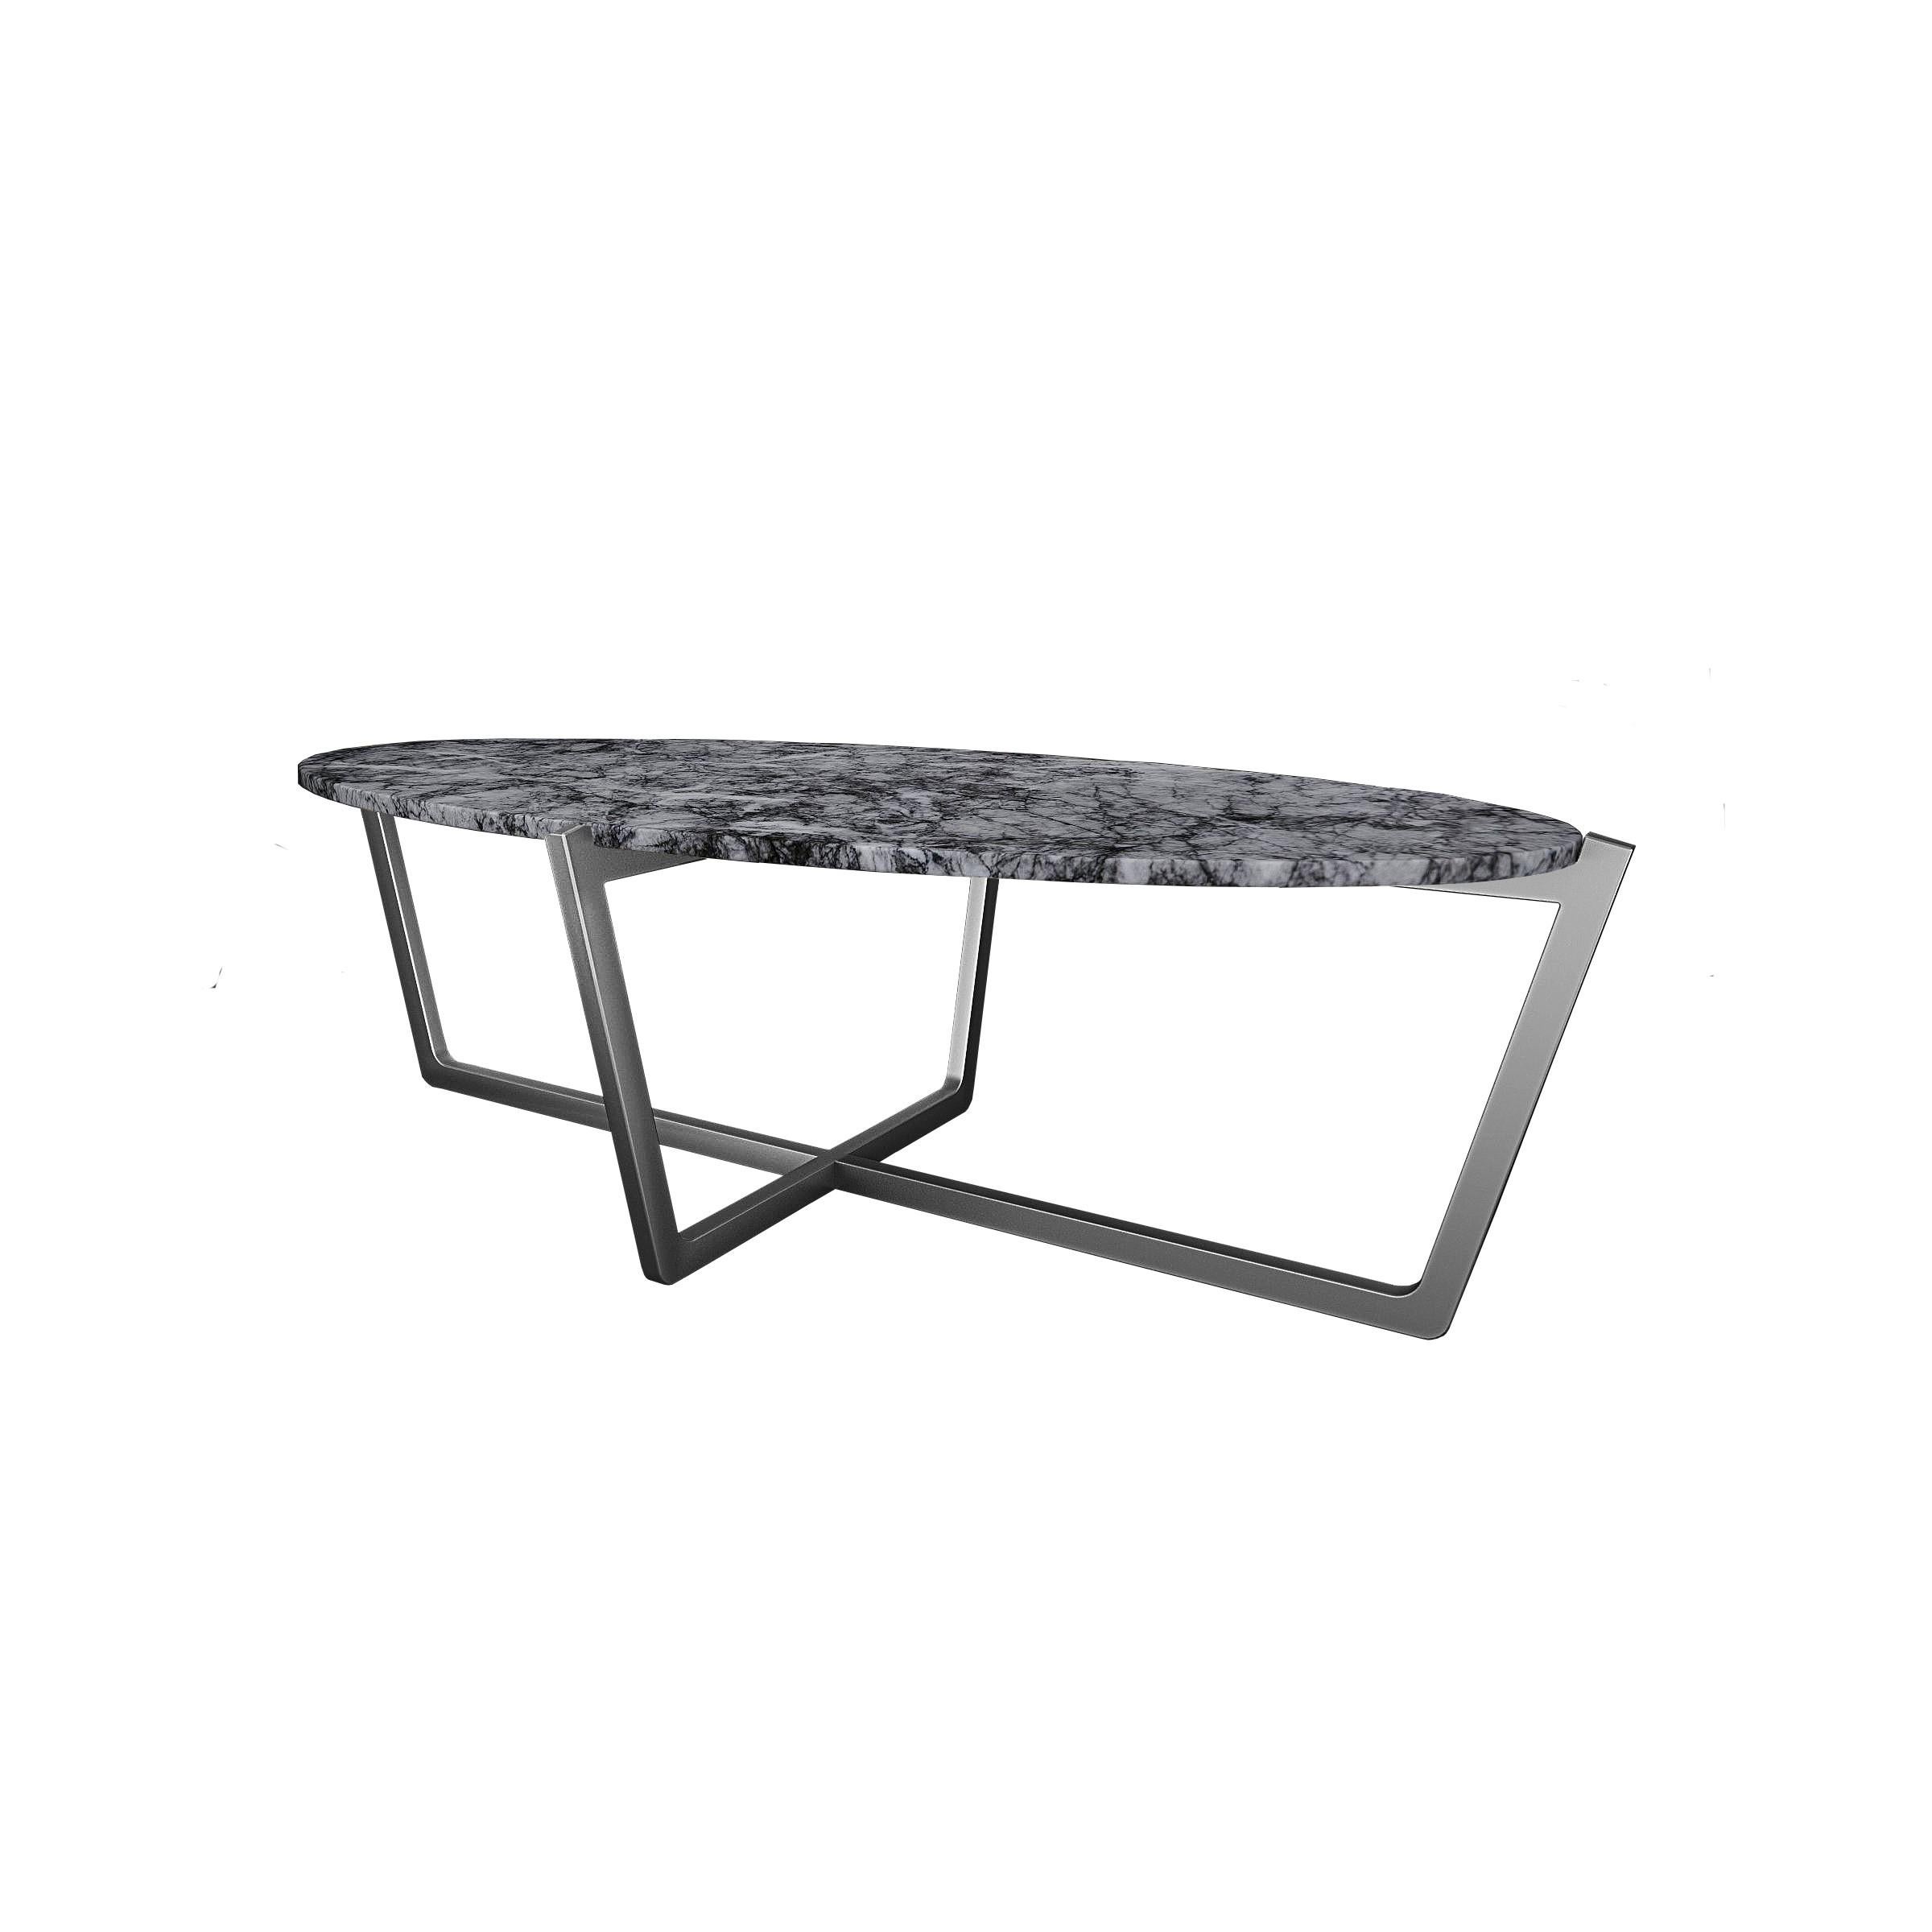 Chinese NORDST EMMA Coffee Table, Italian Green Lightning Marble, Danish Modern Design For Sale